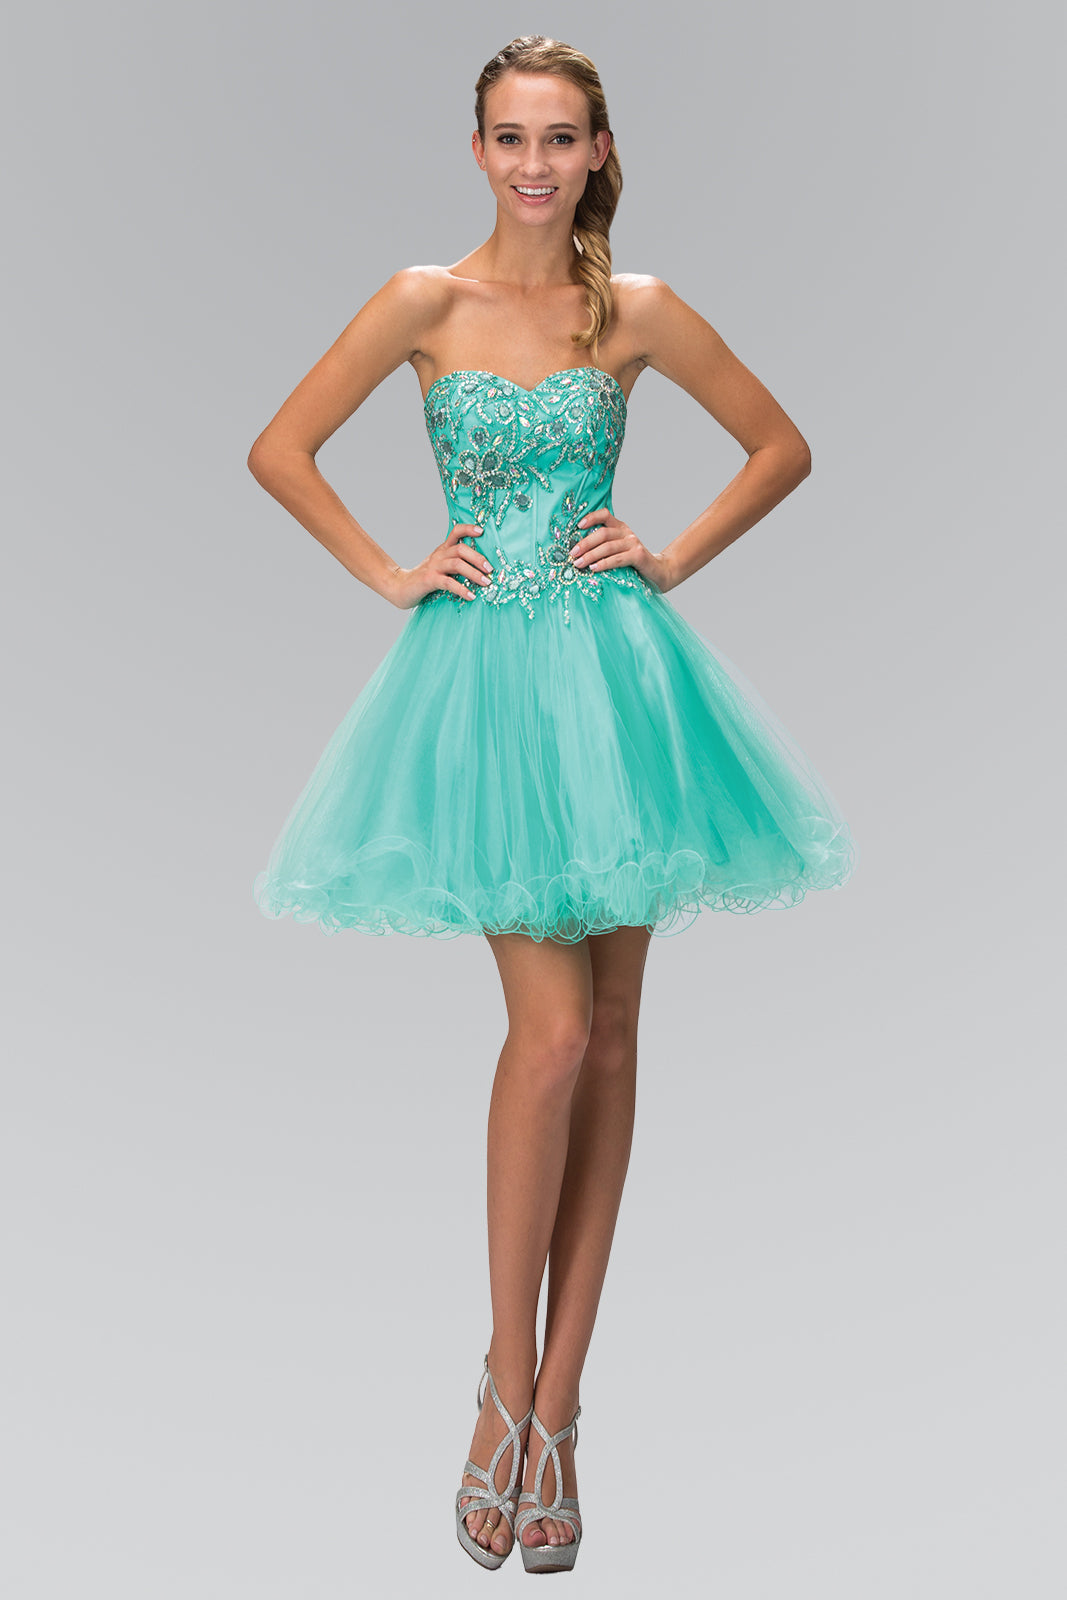 Strapless Sweetheart Tulle Short Dress with Jewel Embellished Bodice and Corset Back Detailing GLGS2132-0